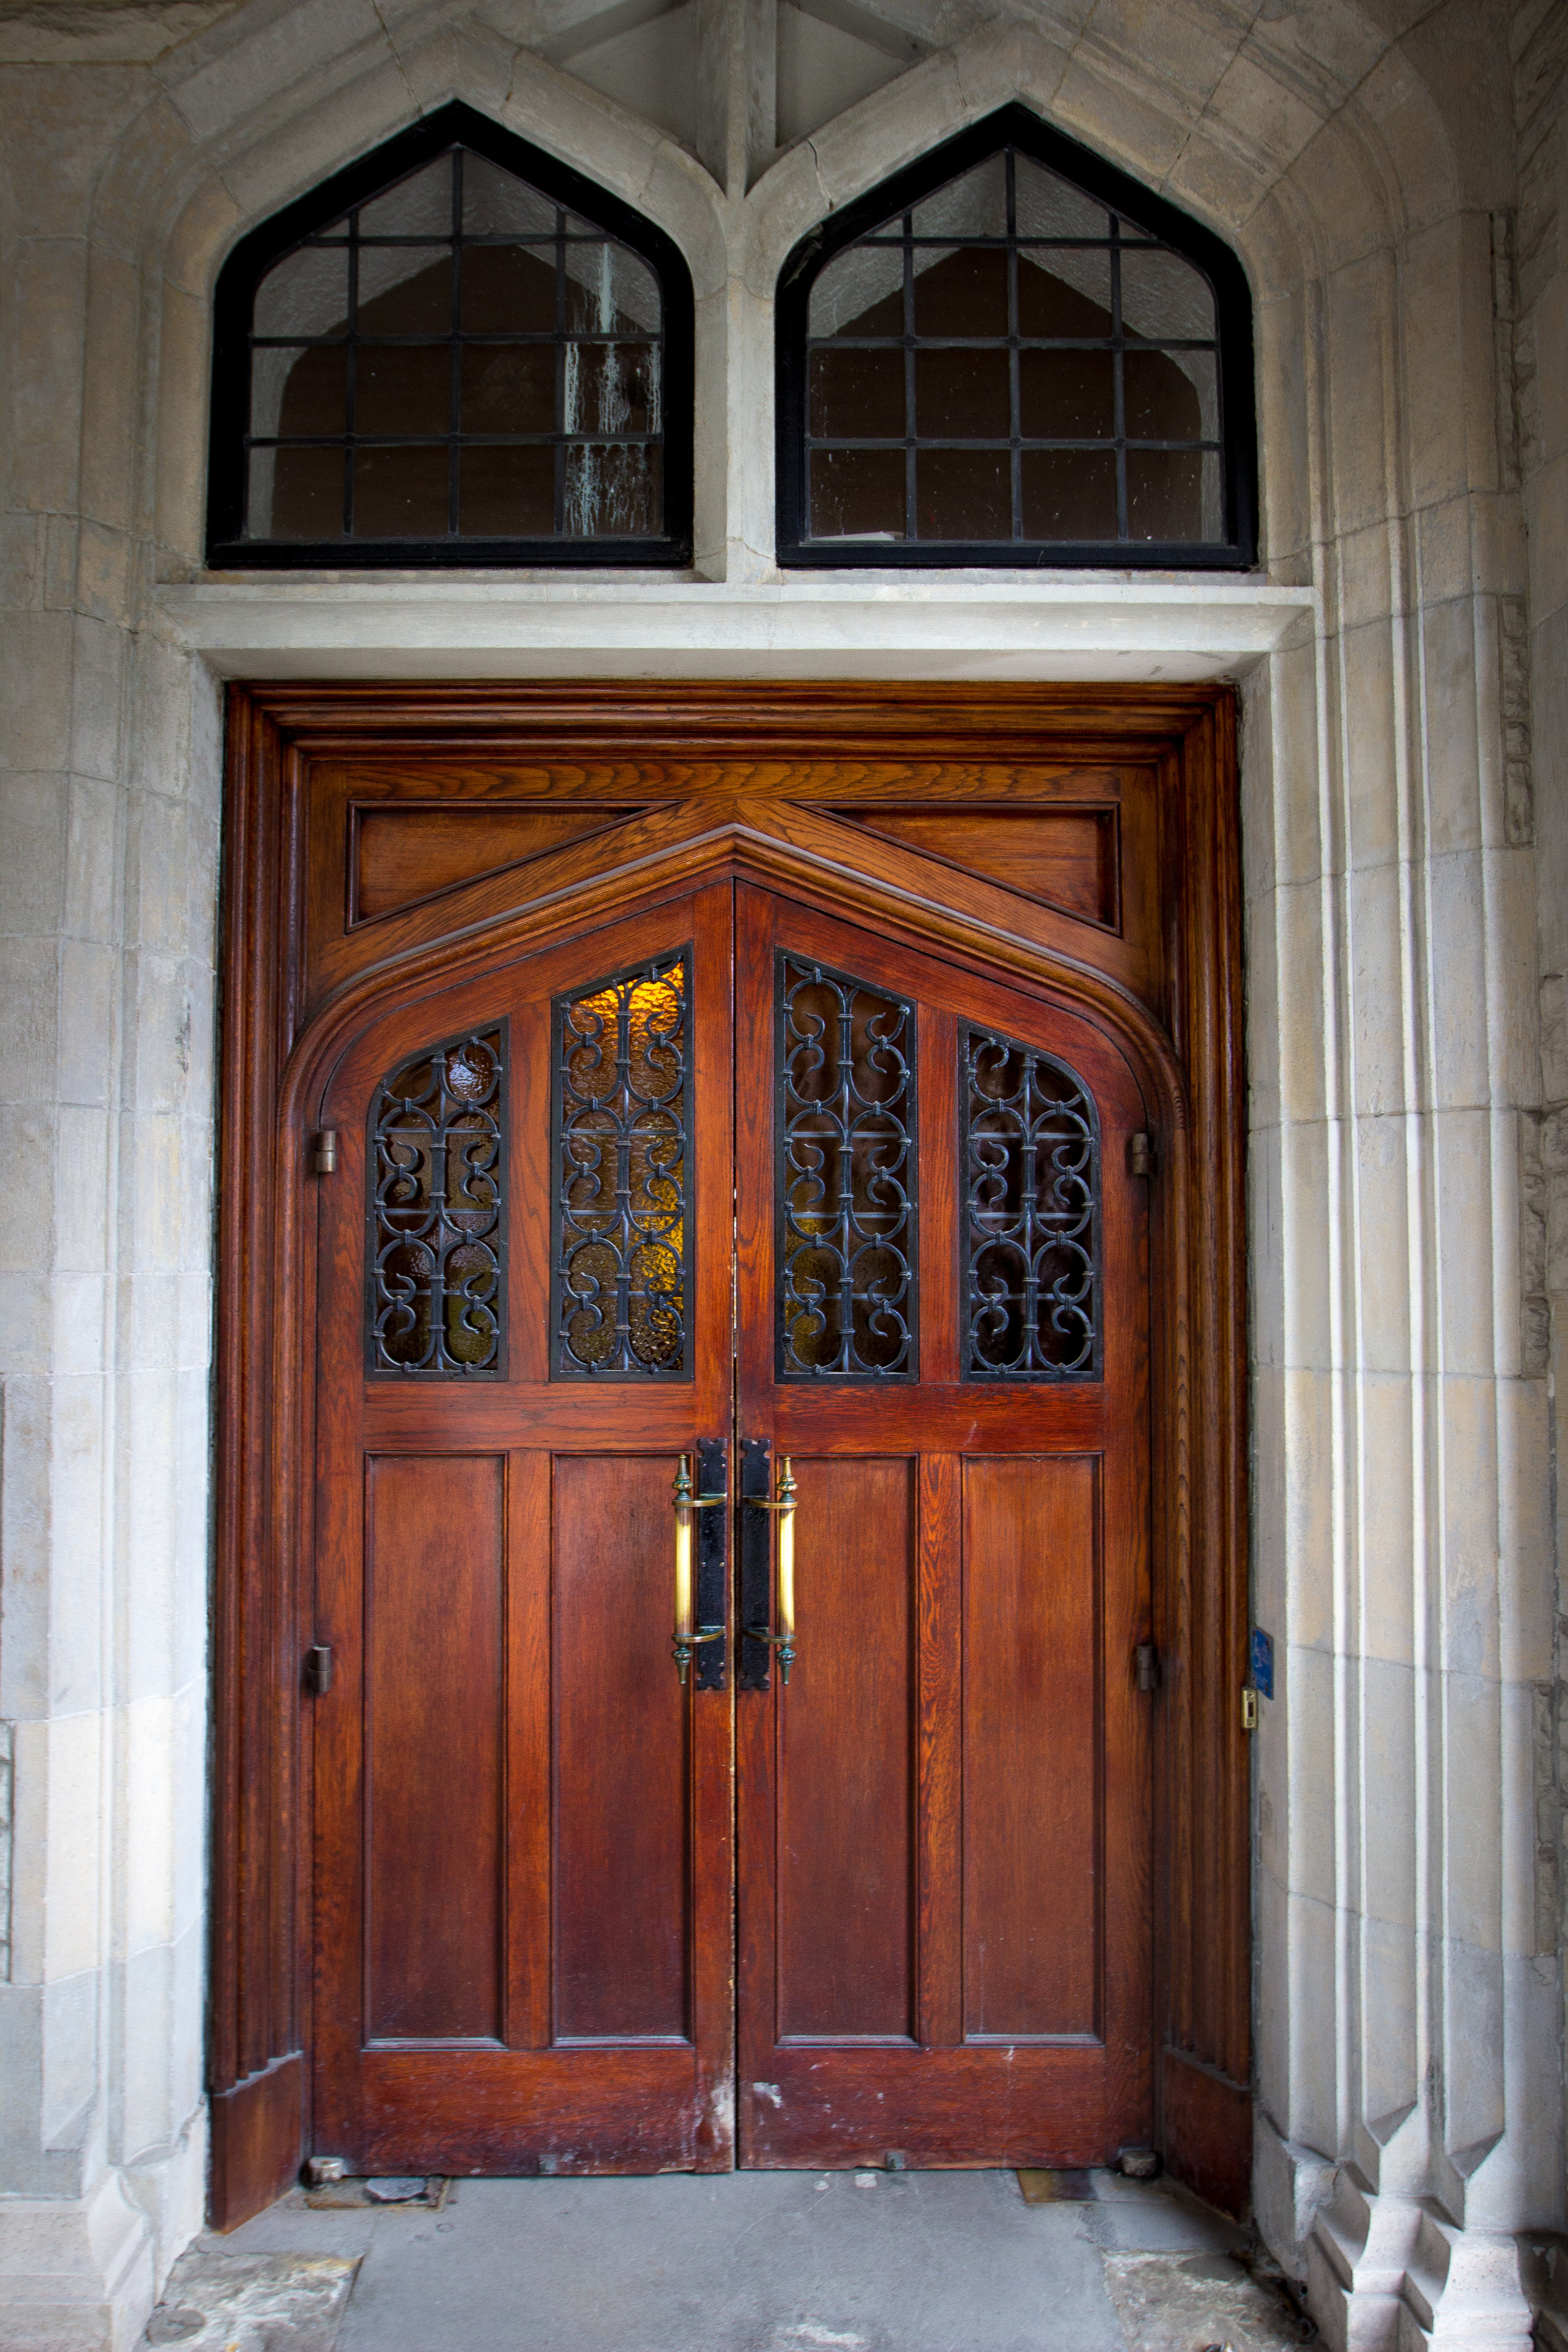 The Doors to the Castle